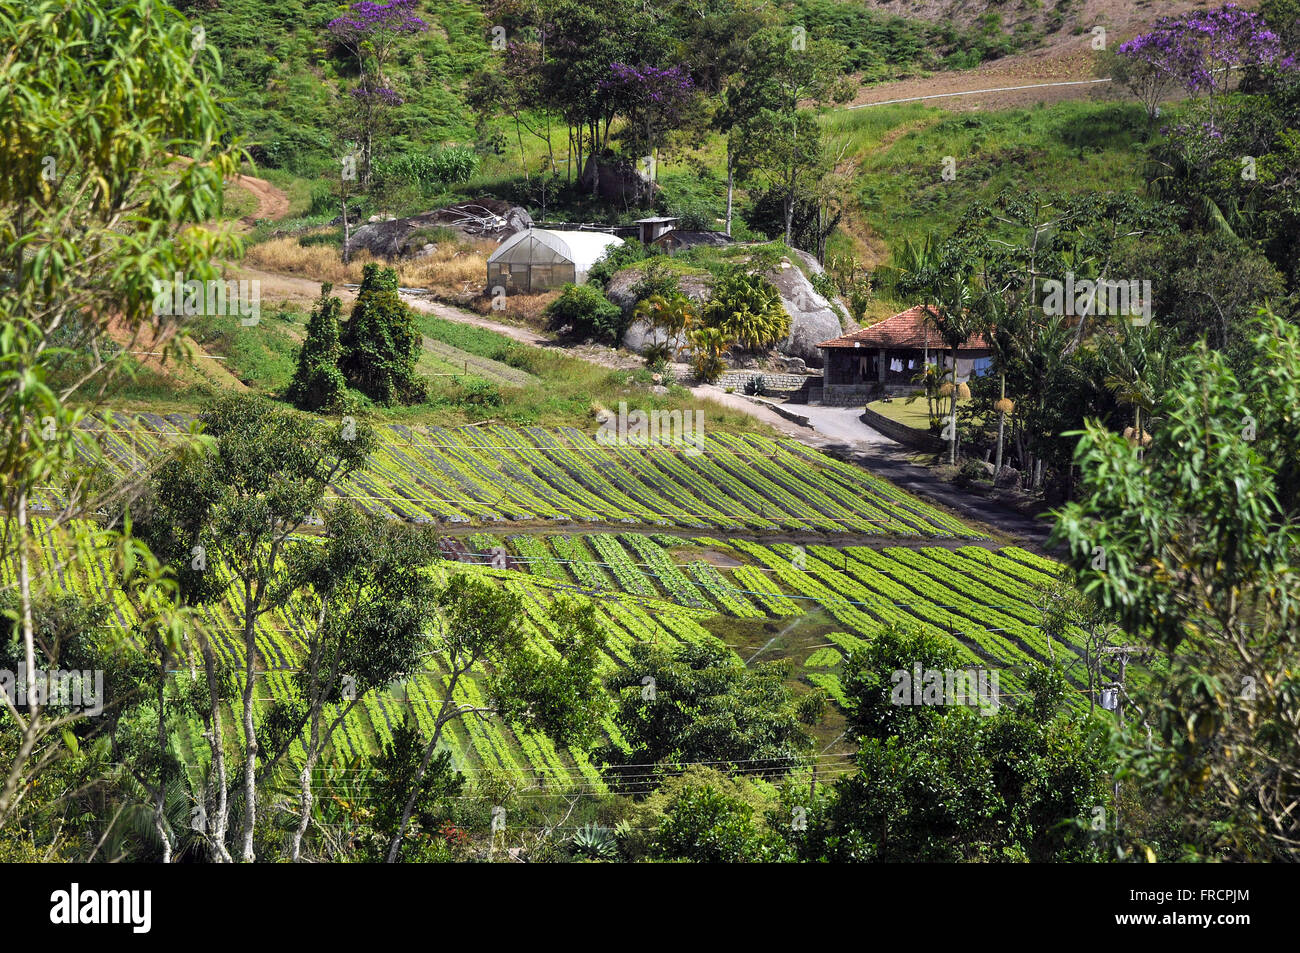 Top view of planting of greenery and living in the countryside Stock Photo